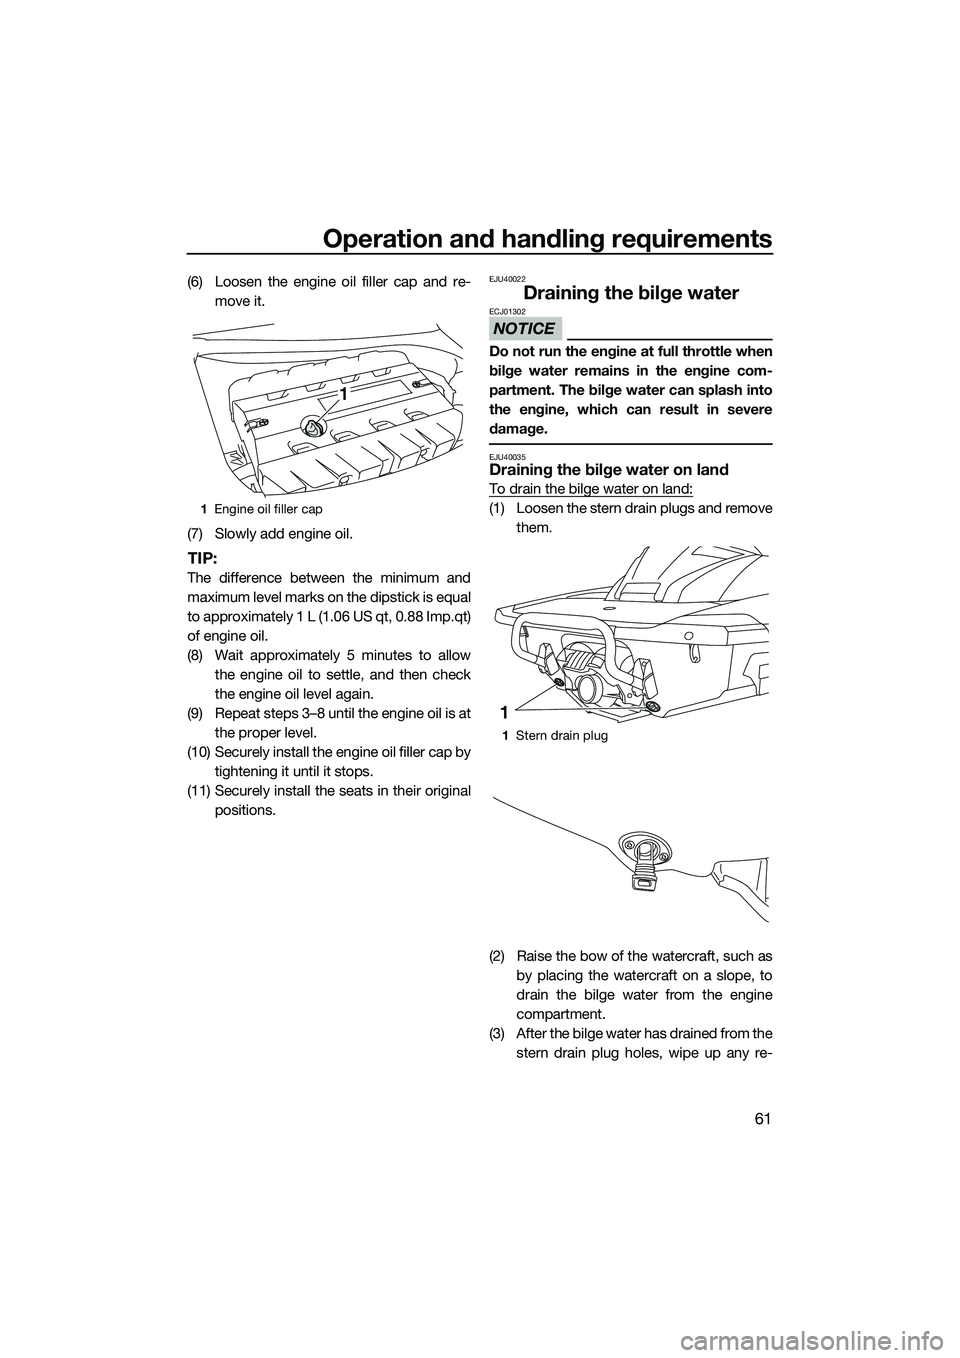 YAMAHA FX SVHO 2014  Owners Manual Operation and handling requirements
61
(6) Loosen the engine oil filler cap and re-move it.
(7) Slowly add engine oil.
TIP:
The difference between the minimum and
maximum level marks on the dipstick i